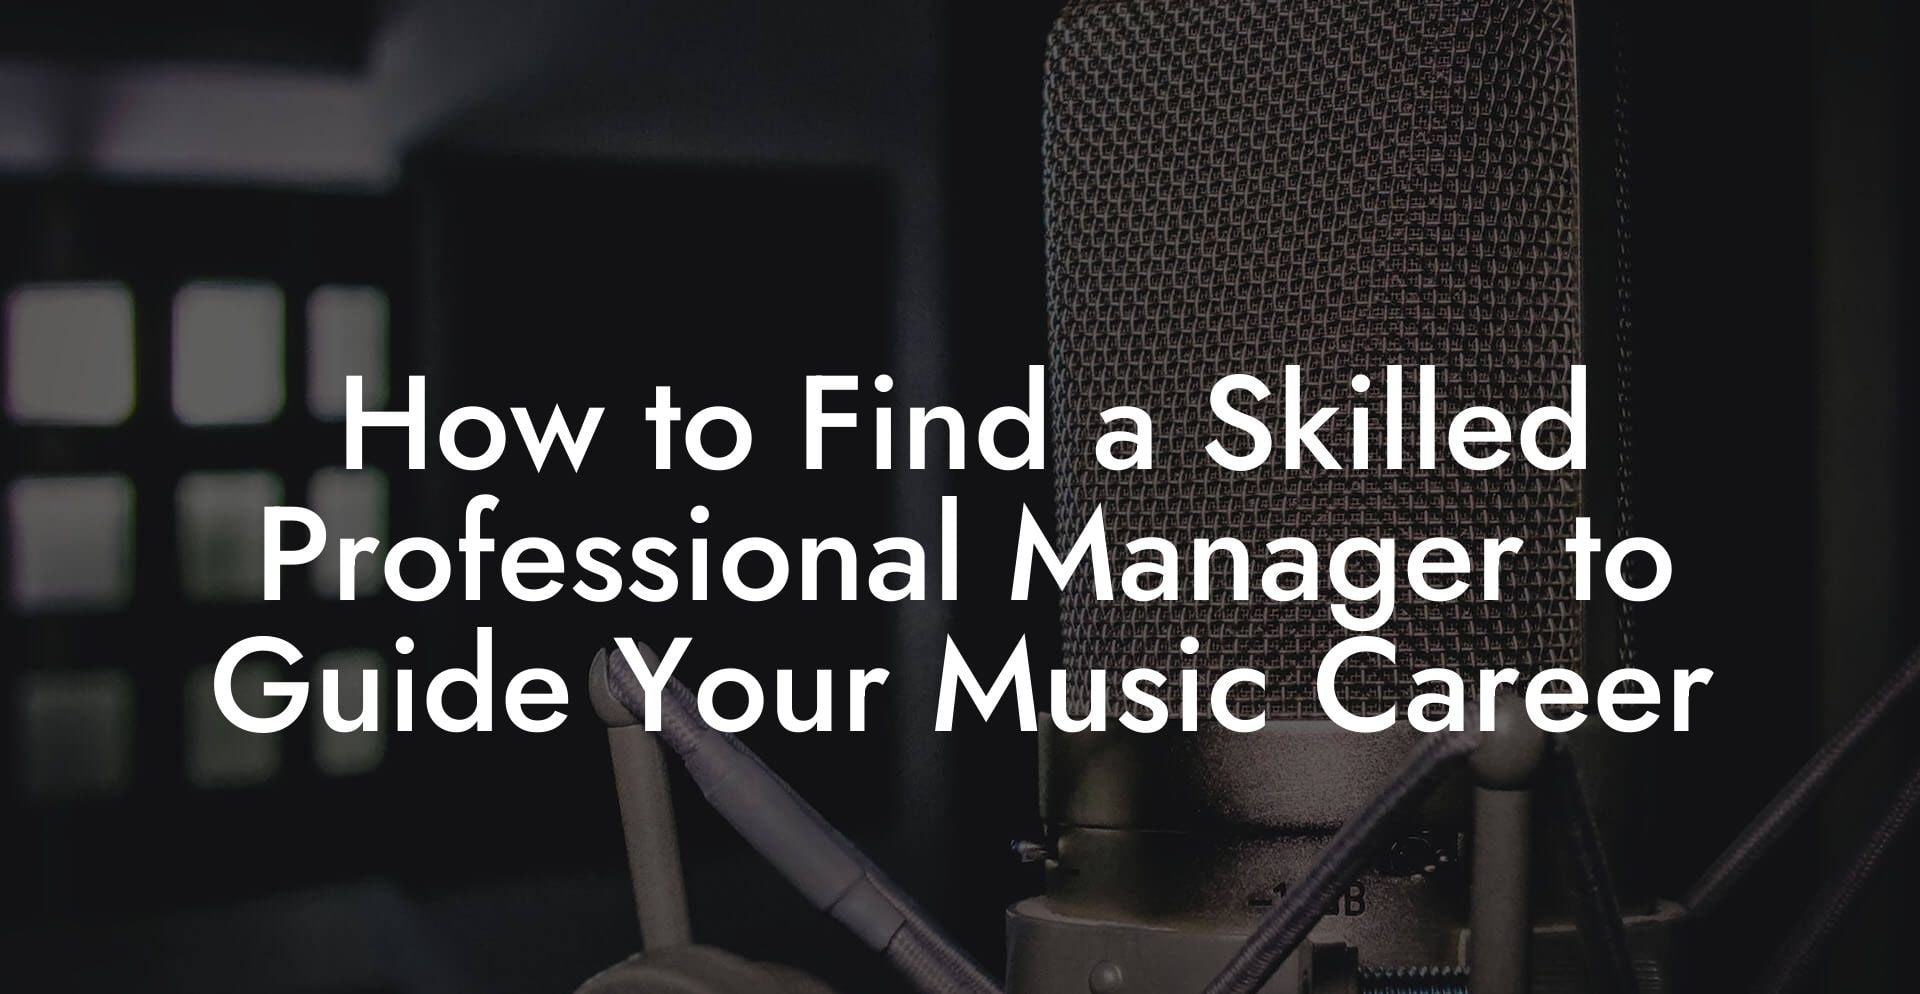 How to Find a Skilled Professional Manager to Guide Your Music Career